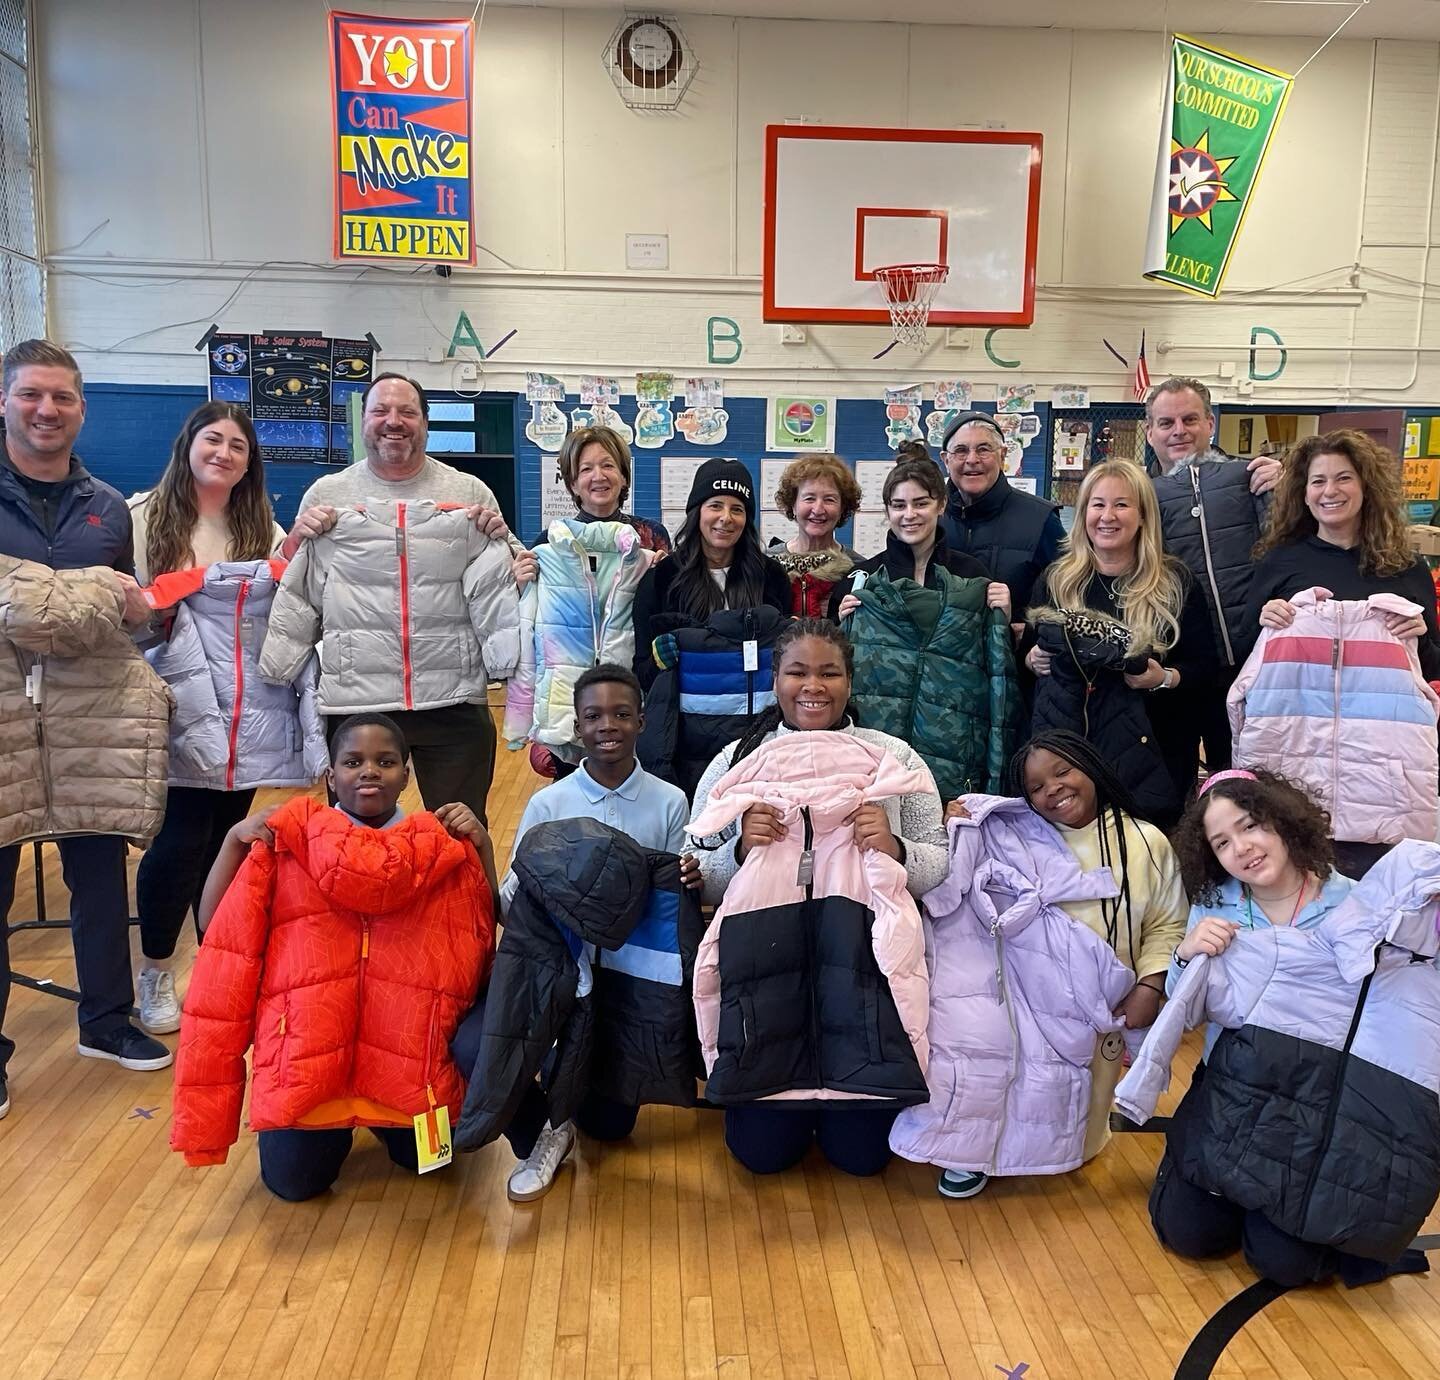 We had a heartwarming morning filled with smiles as we gave all 270 students at the Louverture School brand new winter coats! Thank you to our amazing supporters, The Ralph Errington Foundation, and volunteers for making this program so successful an